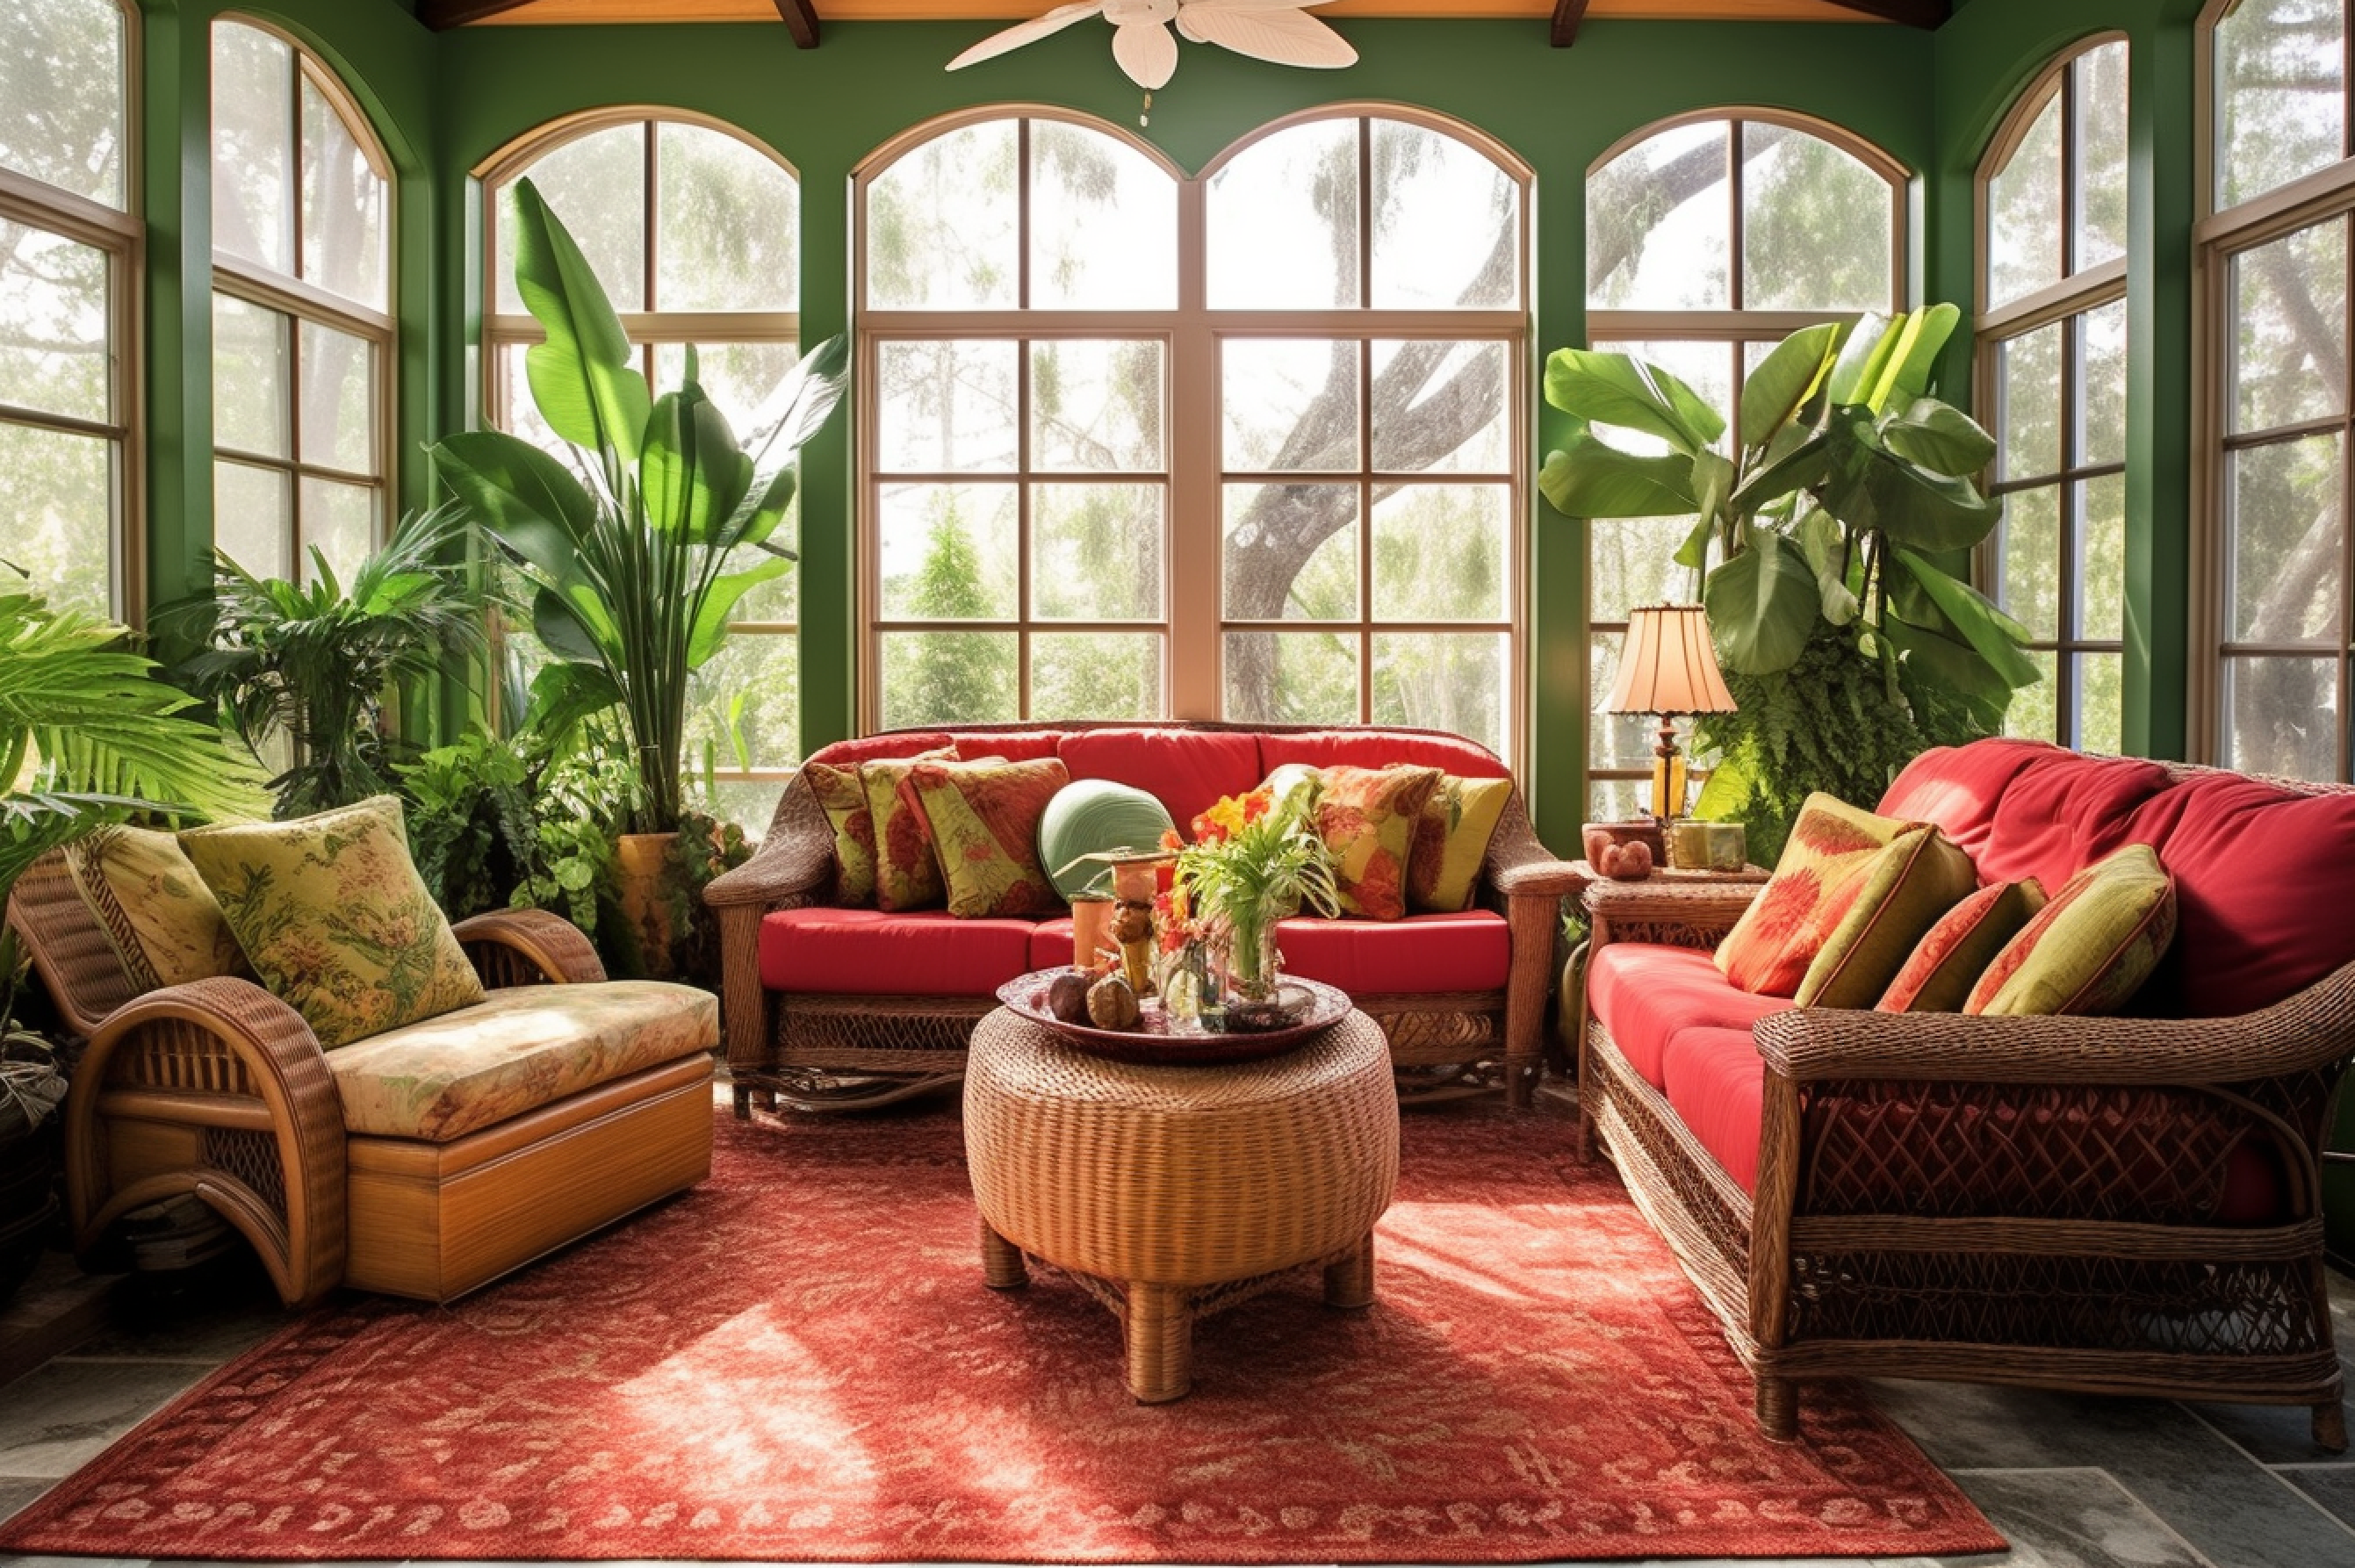 11. Green, Yellow, and Red Color Scheme - Tropical Sunroom